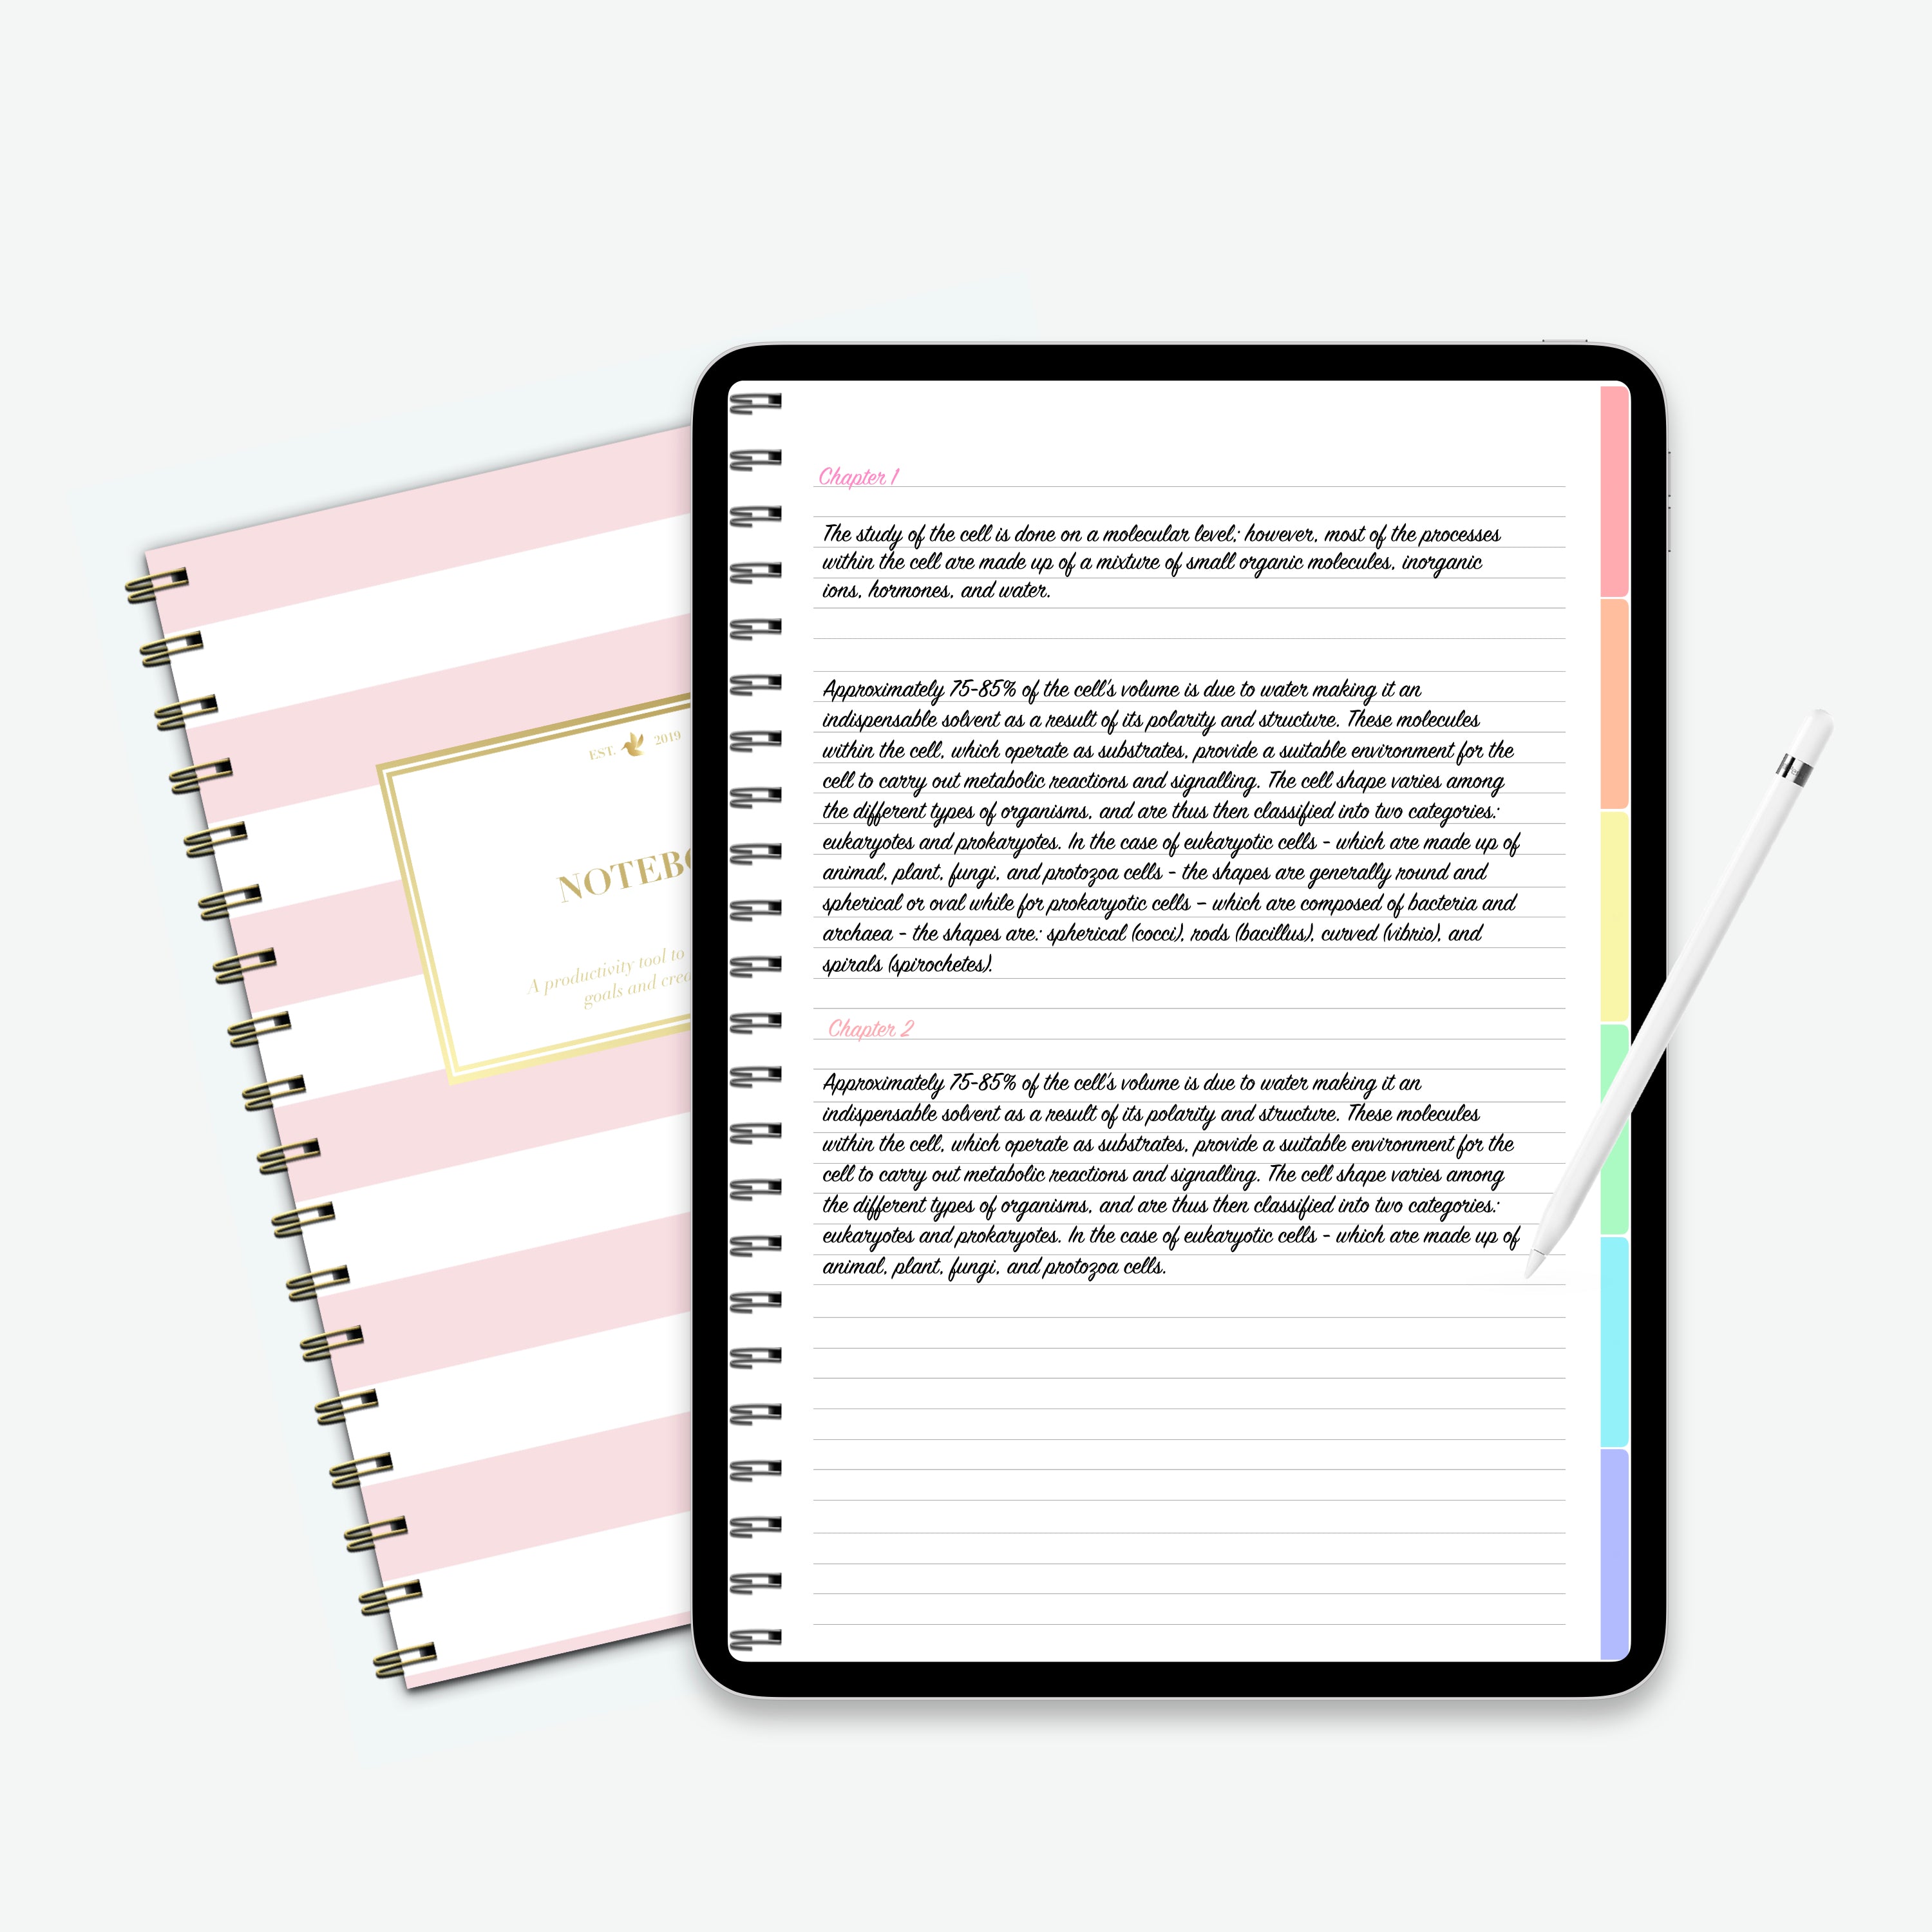 Digital】ipad electronic hand account Shelton with the same style / American  marble pattern notebook / digital hand account / hand account material -  Shop miannnn Digital Planner & Materials - Pinkoi